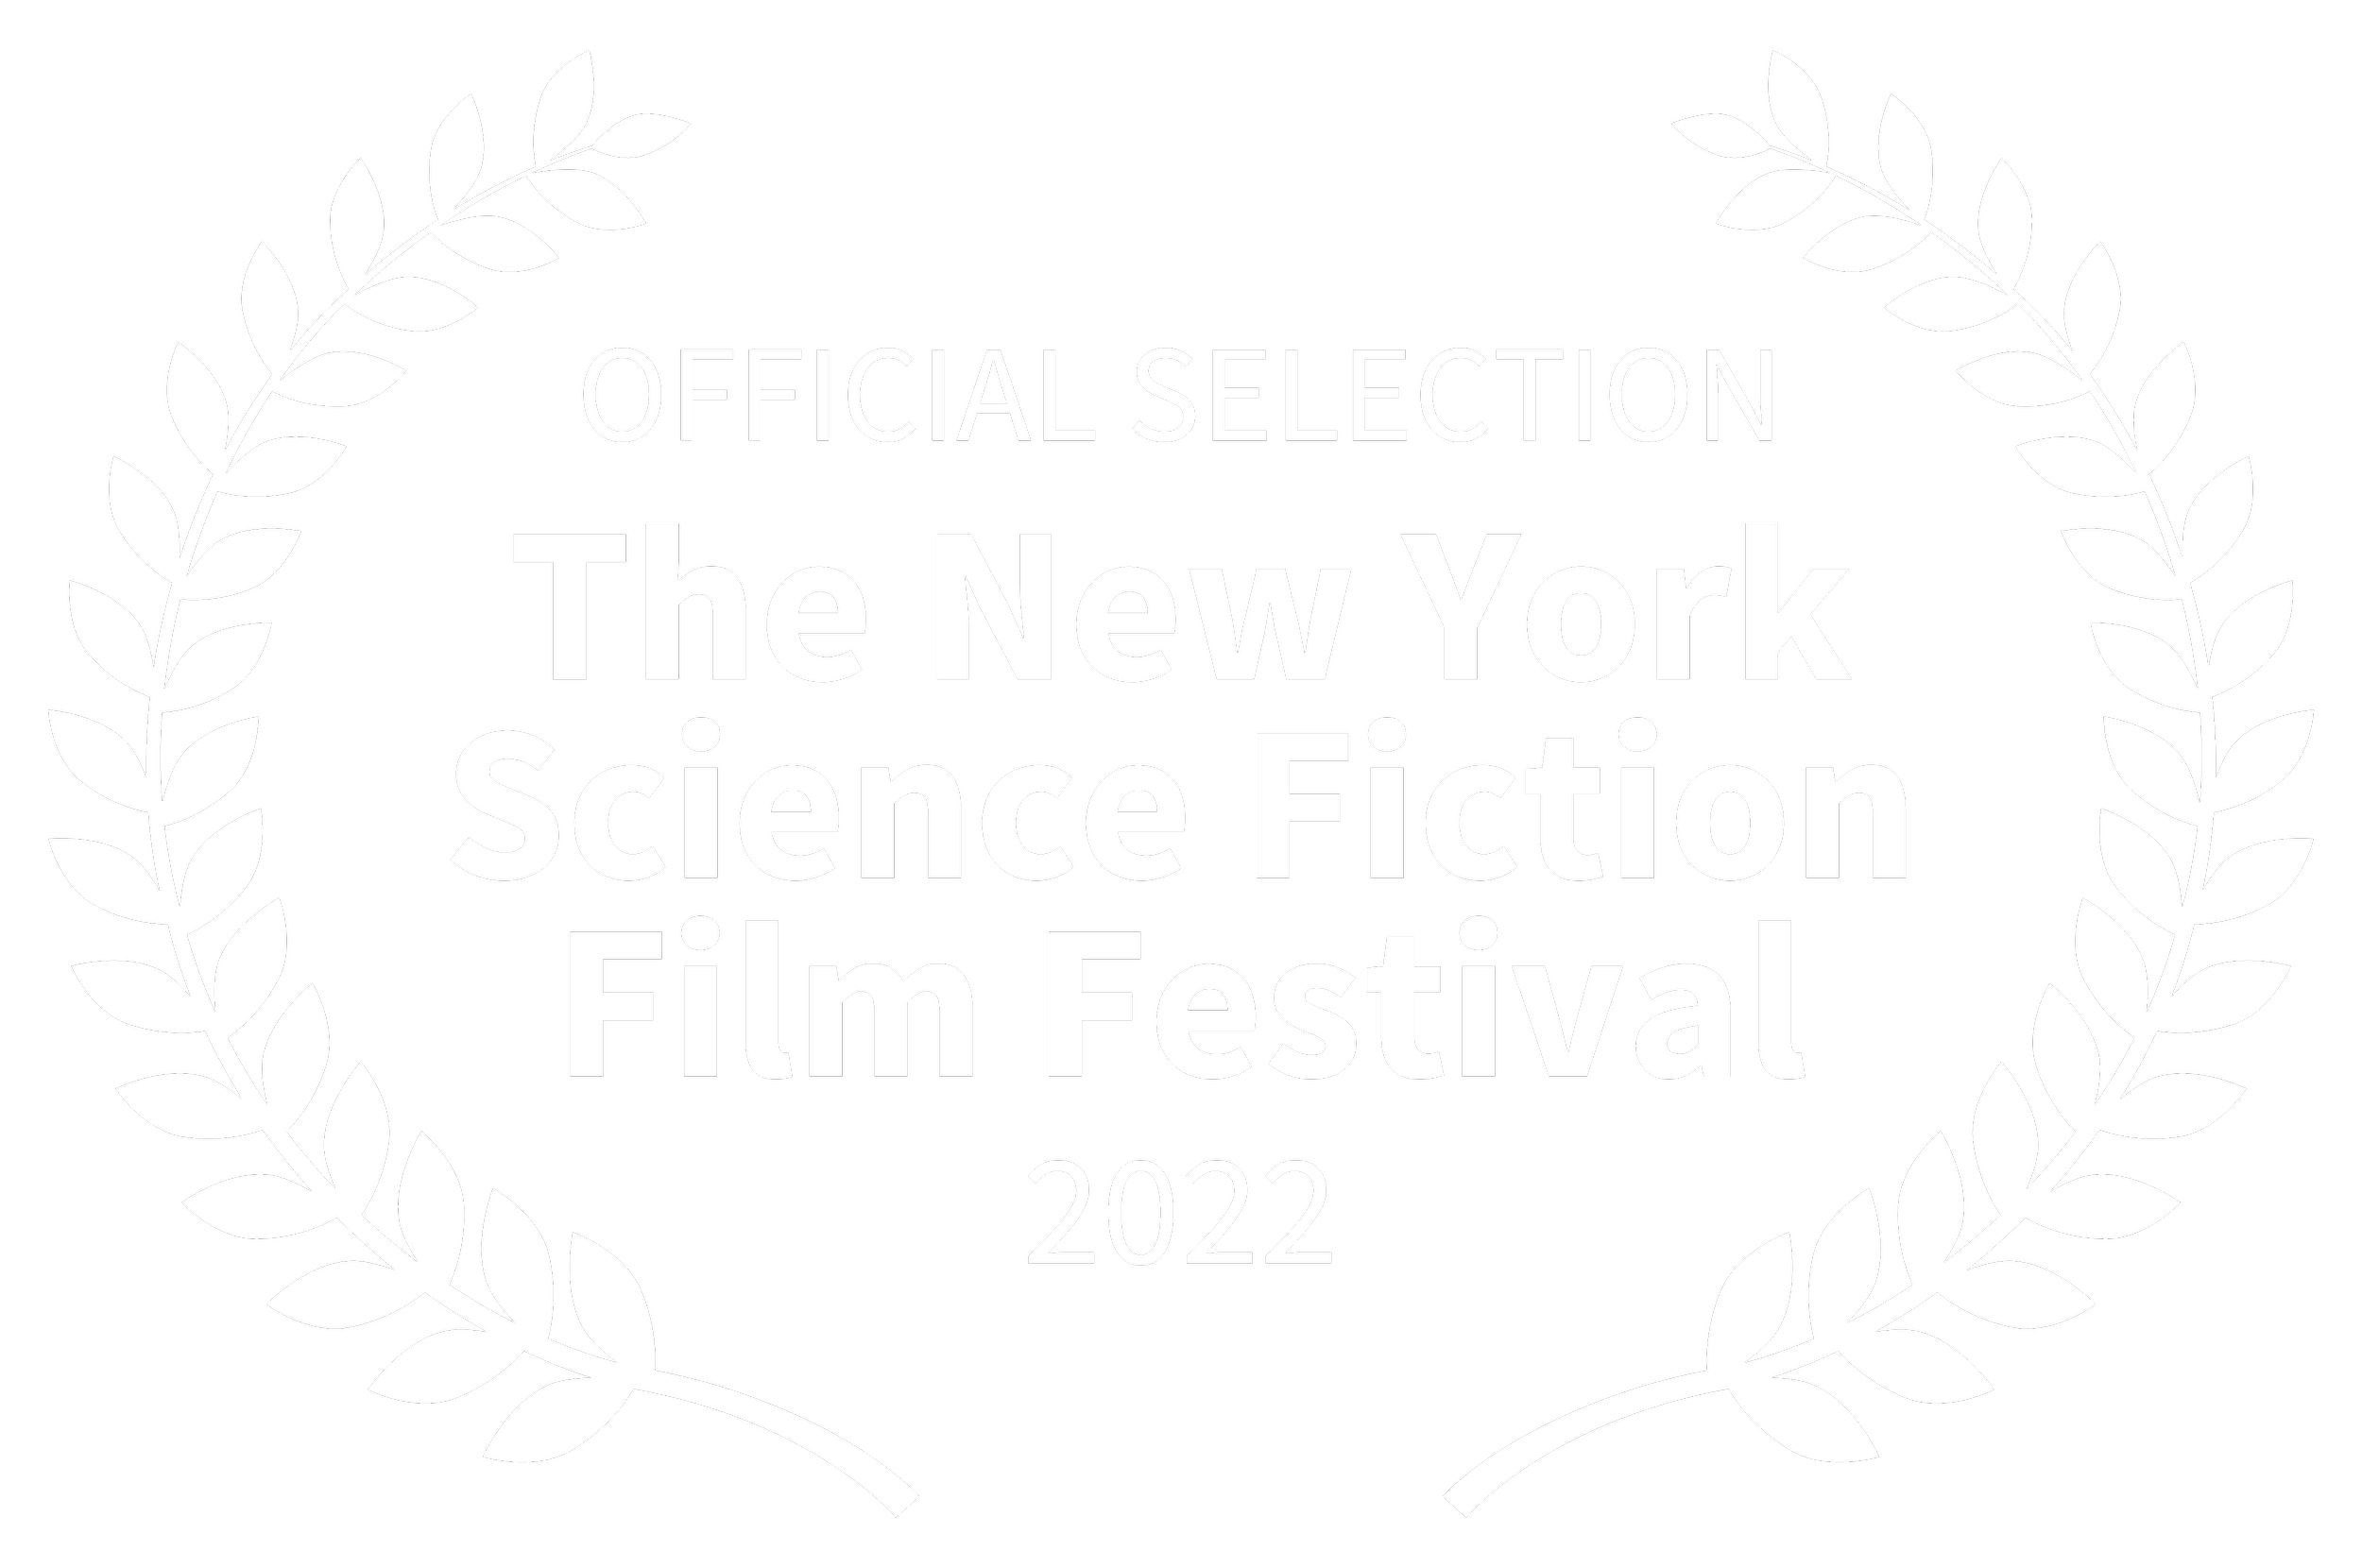 OFFICIALSELECTION-TheNewYorkScienceFictionFilmFestival-2022-1.png